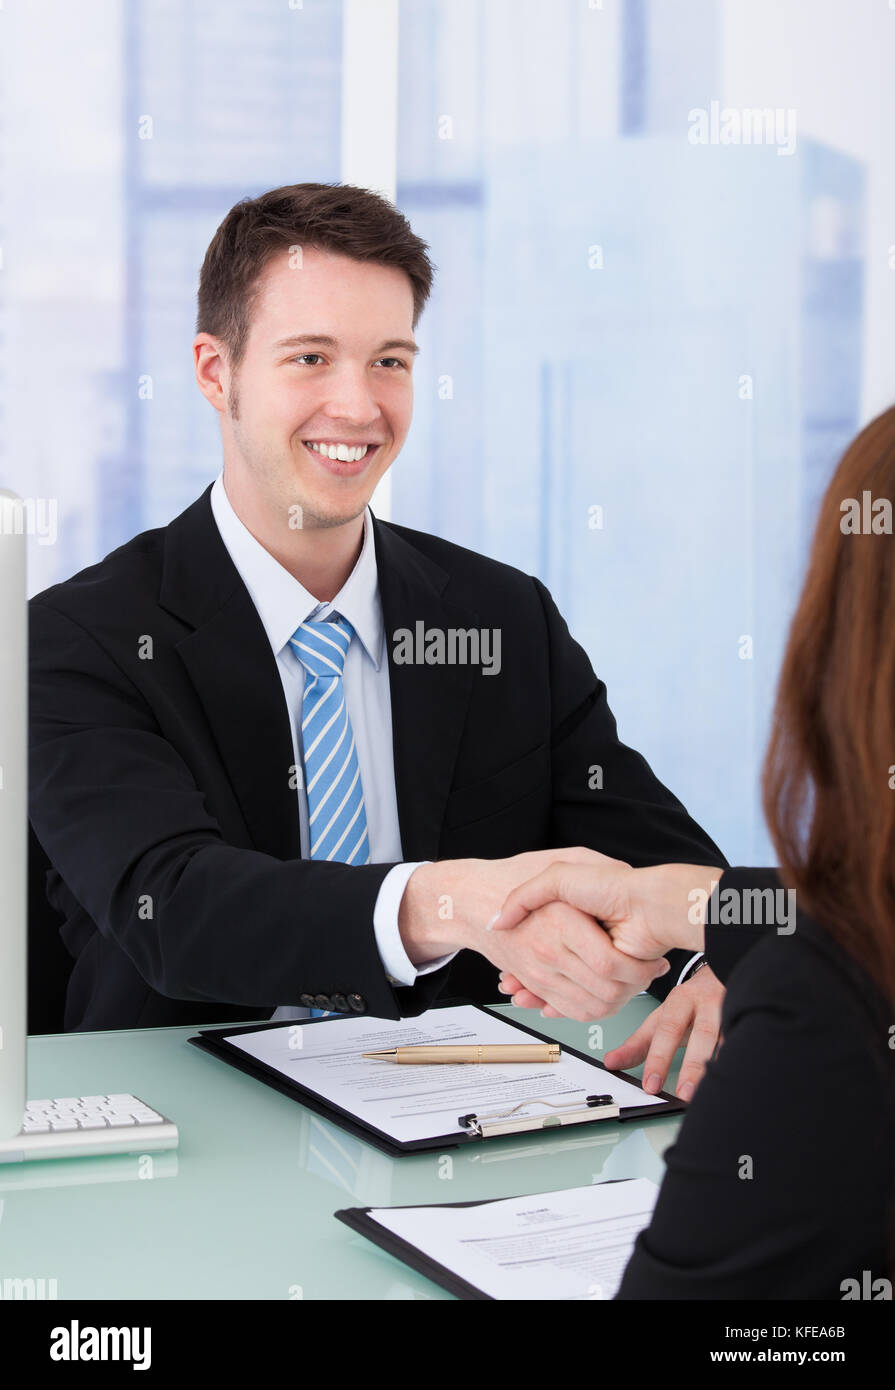 Young businessman shaking hand de candidate during job interview Banque D'Images